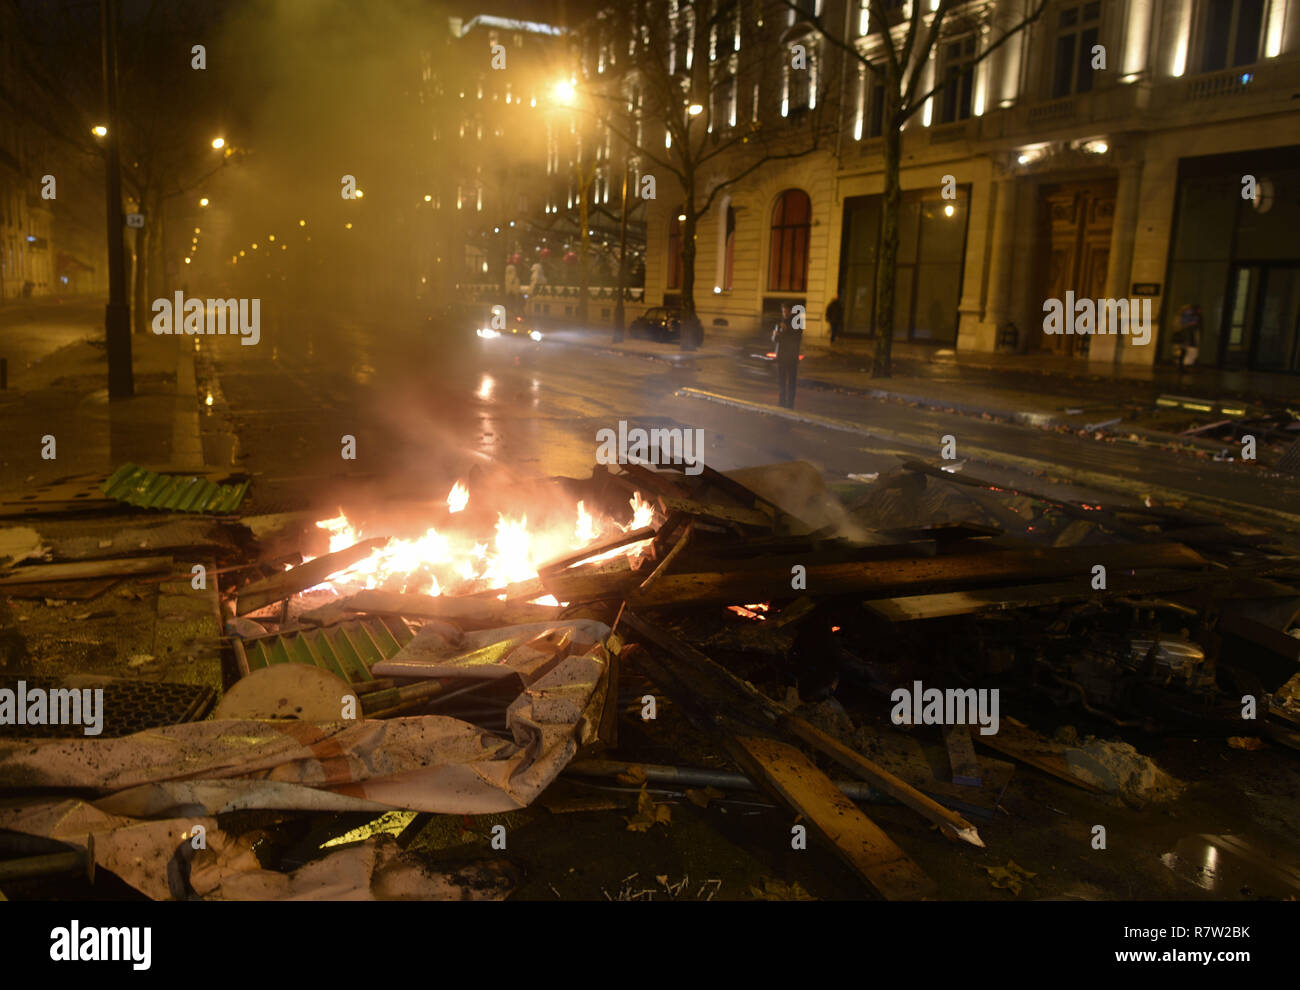 December 01, 2018 - Paris, France: Remains of a barricade on fire on avenue  Kleber after a day of violent protest against French President Emmanuel  Macron's policies. Yellow vest protesters set fire